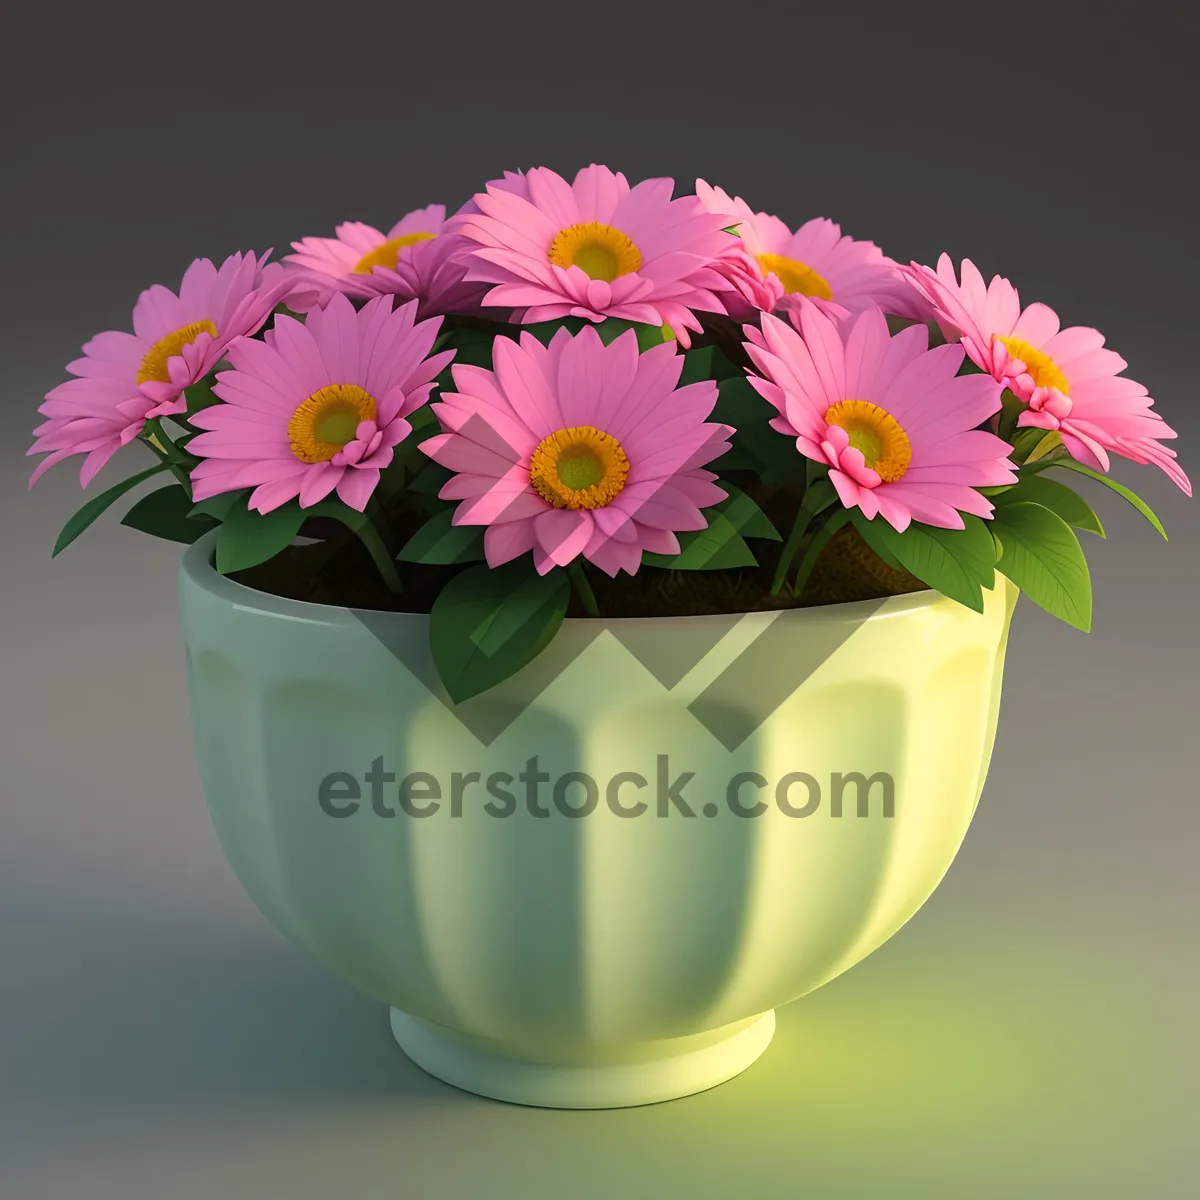 Picture of Colorful Floral Bouquet in Pink Vase